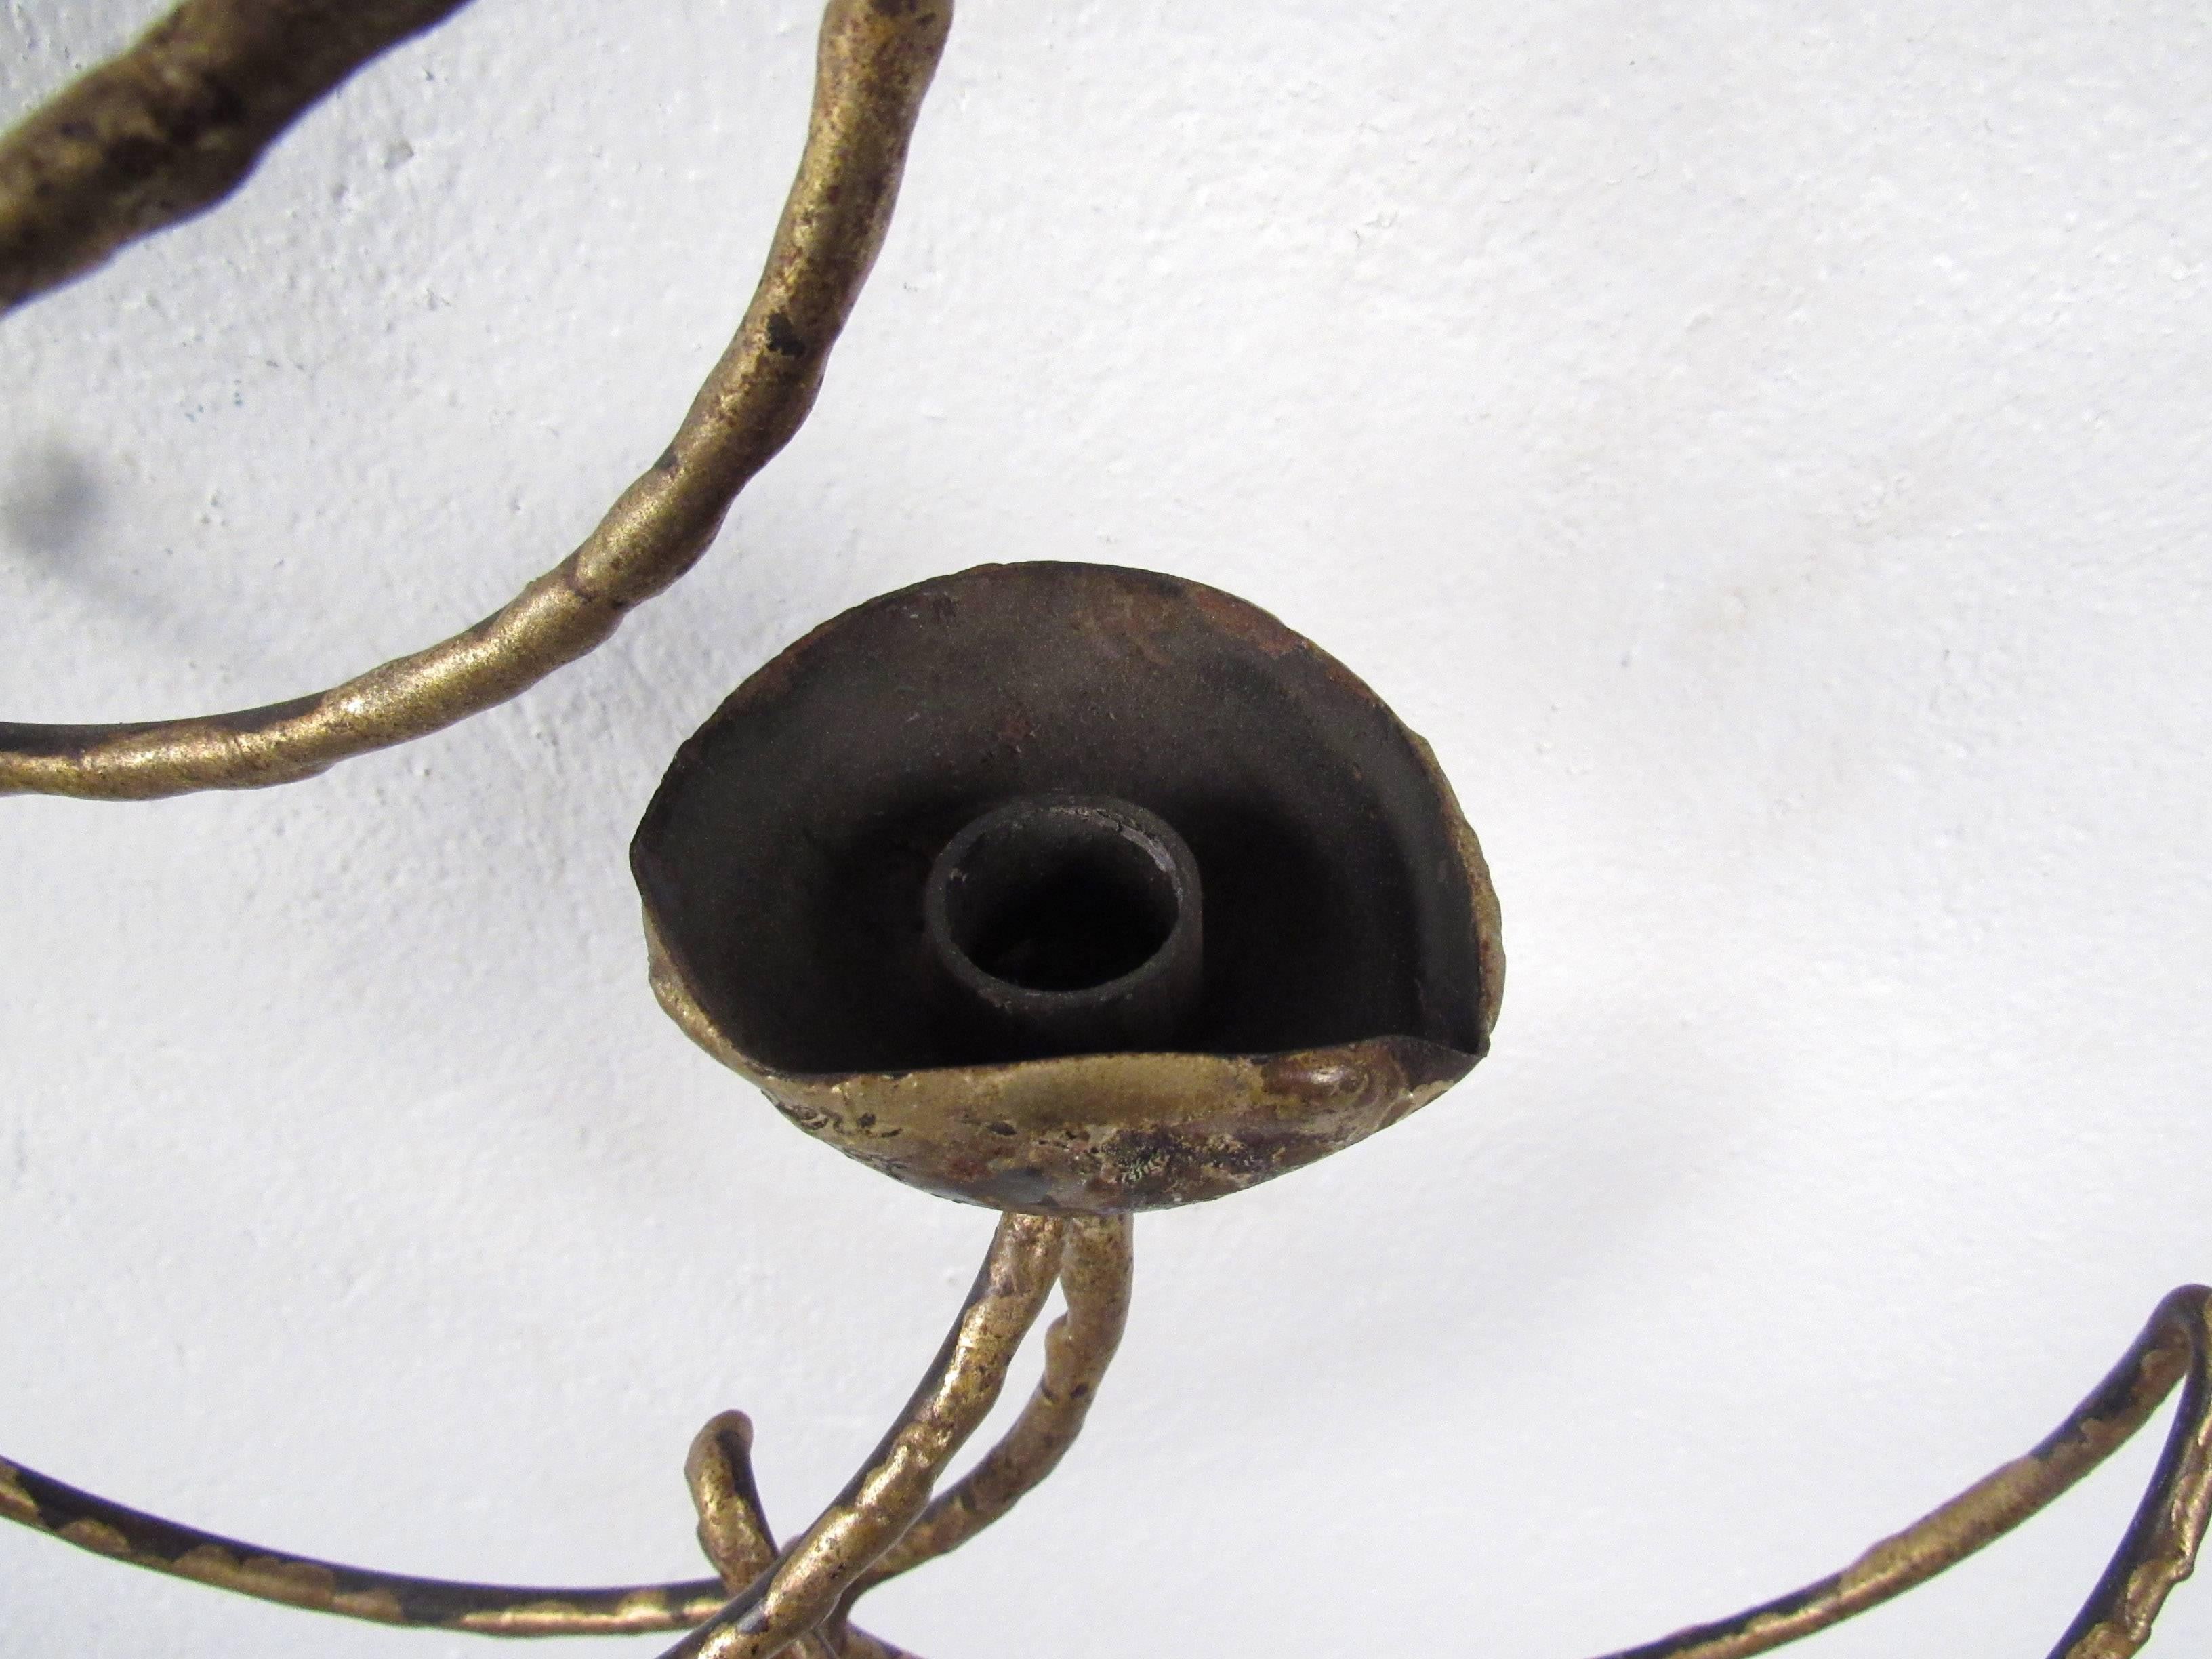 Vintage-modern sculptural brass wall sconce signed C-Jere.

Please confirm item location NY or NJ with dealer.